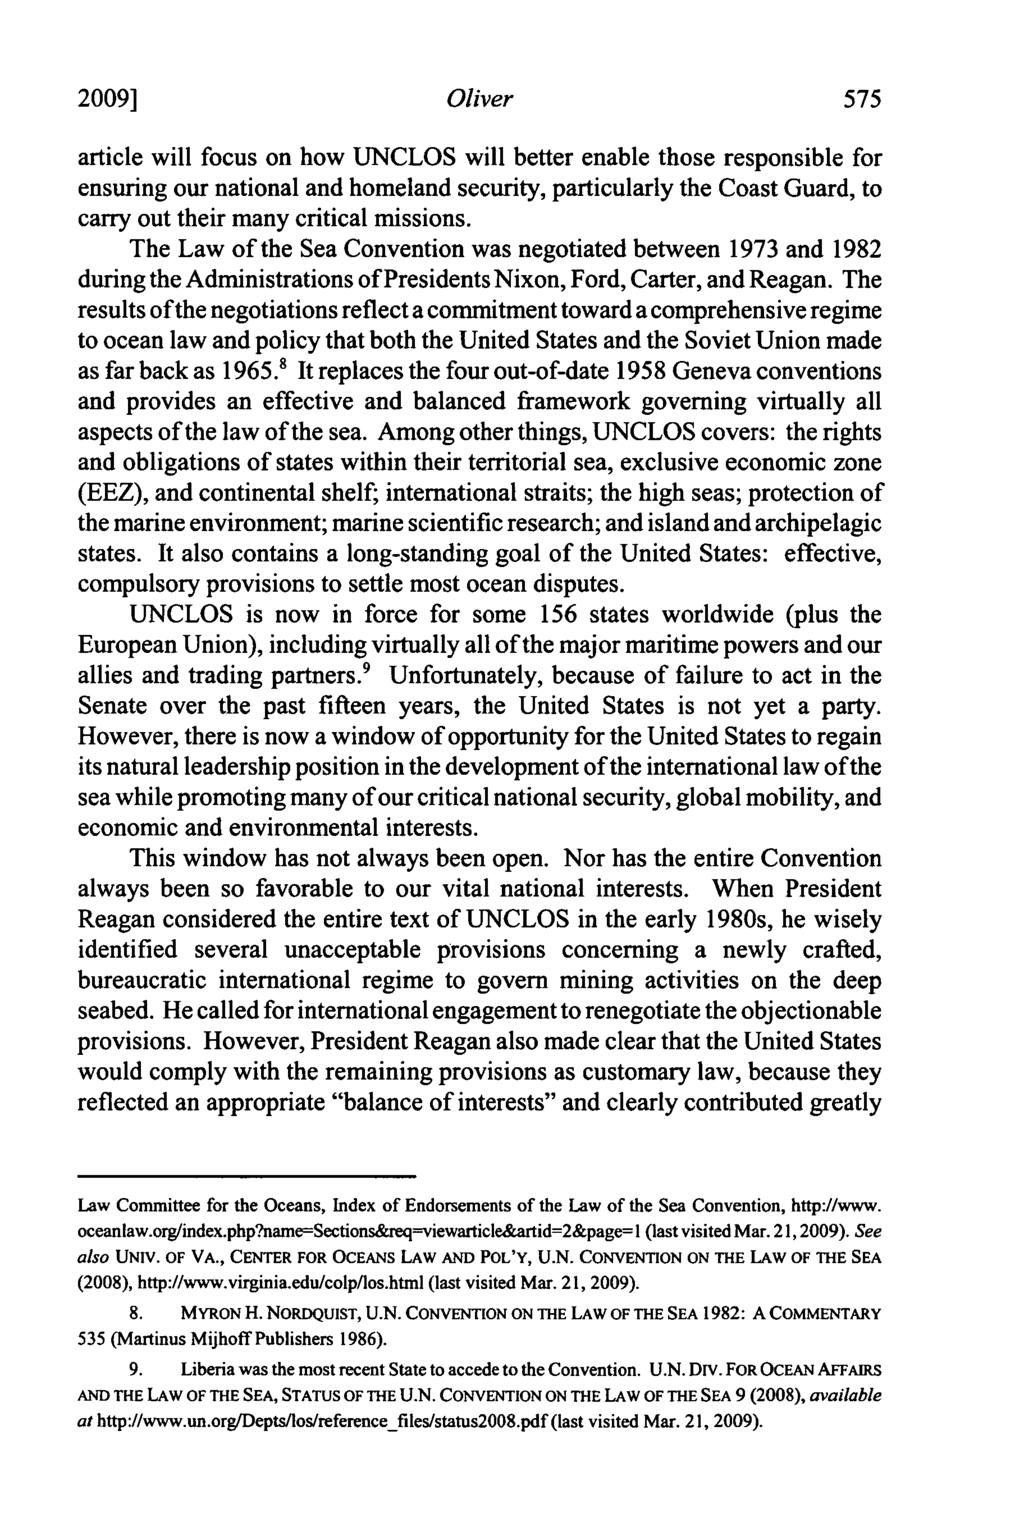 2009] Oliver article will focus on how UNCLOS will better enable those responsible for ensuring our national and homeland security, particularly the Coast Guard, to carry out their many critical